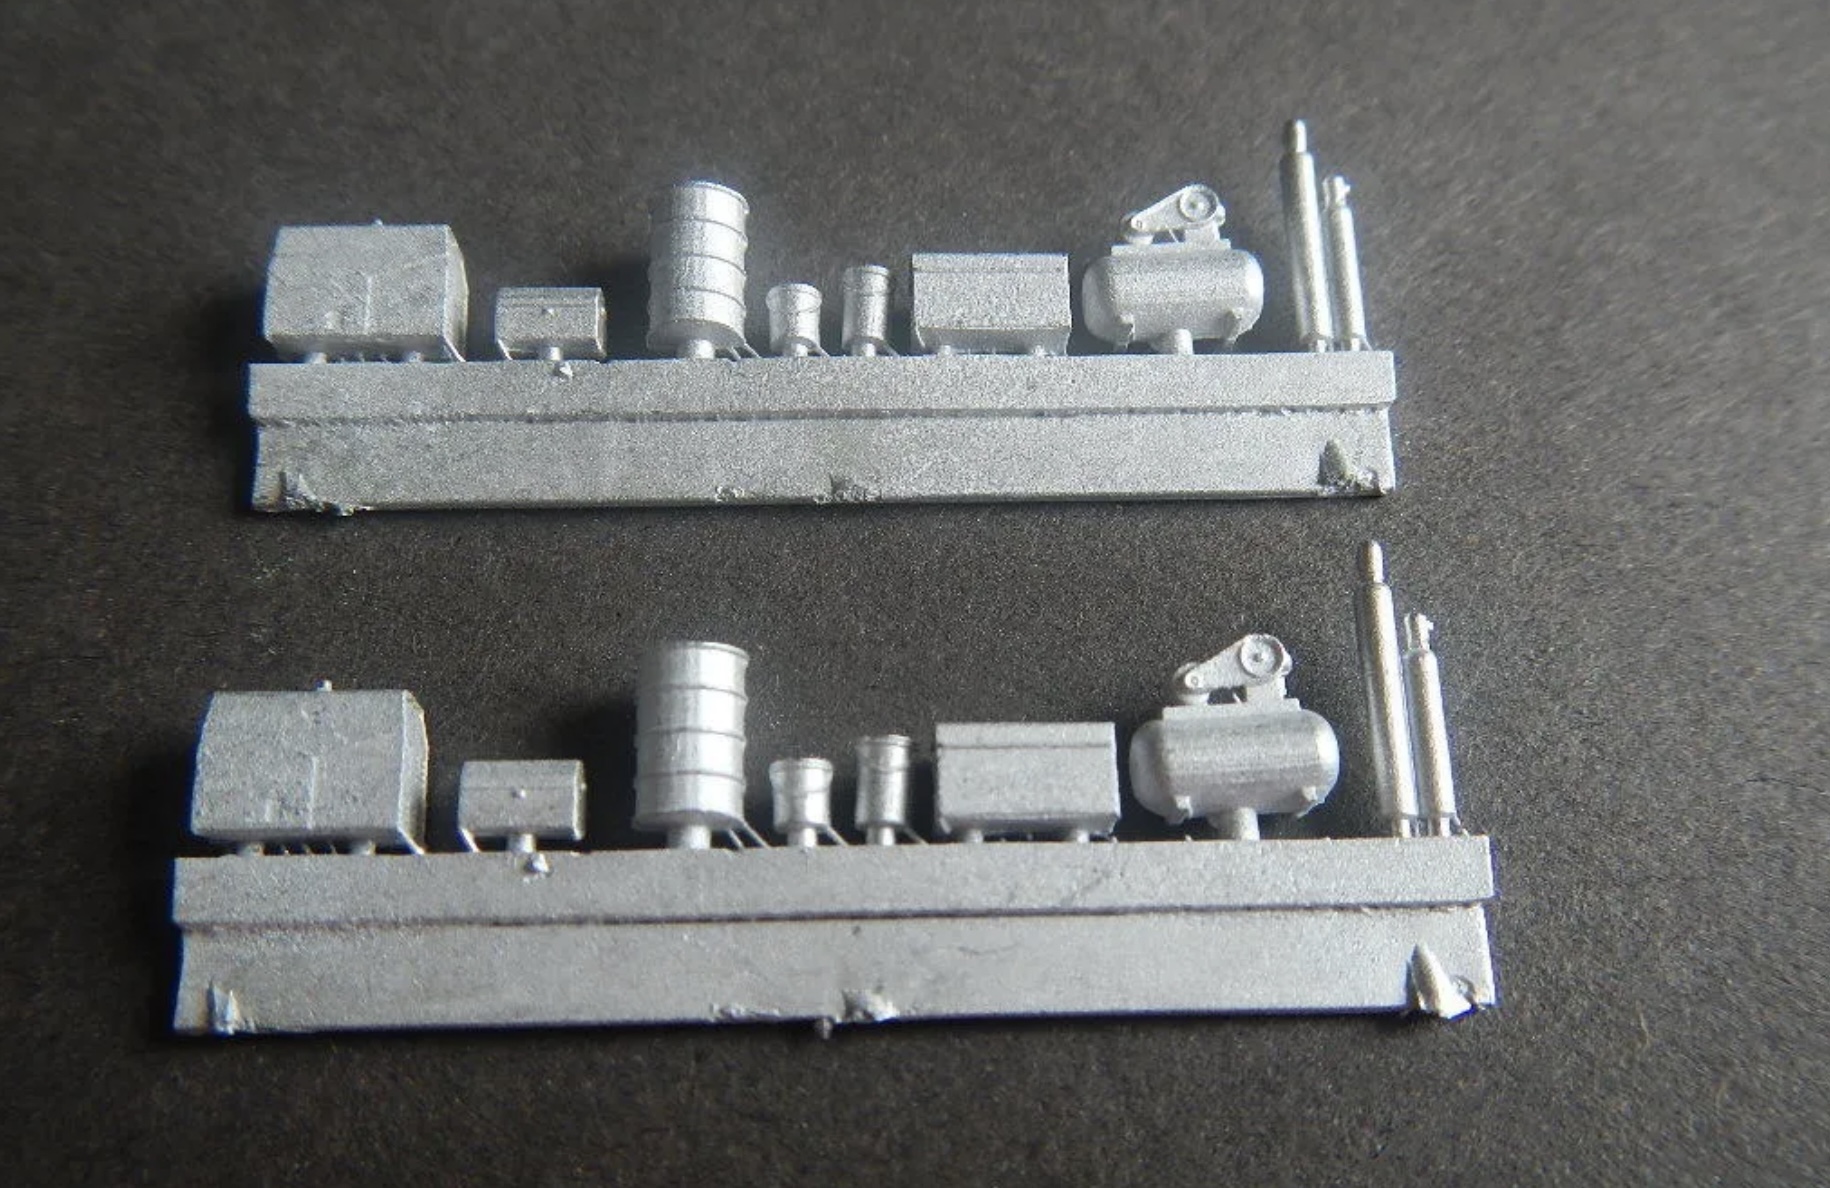 N Scale - Showcase Miniatures - 45 - Accessories, Gas Station, Repair Shop, Tools - Undecorated - Standard Service Truck/Machine Shop Tools